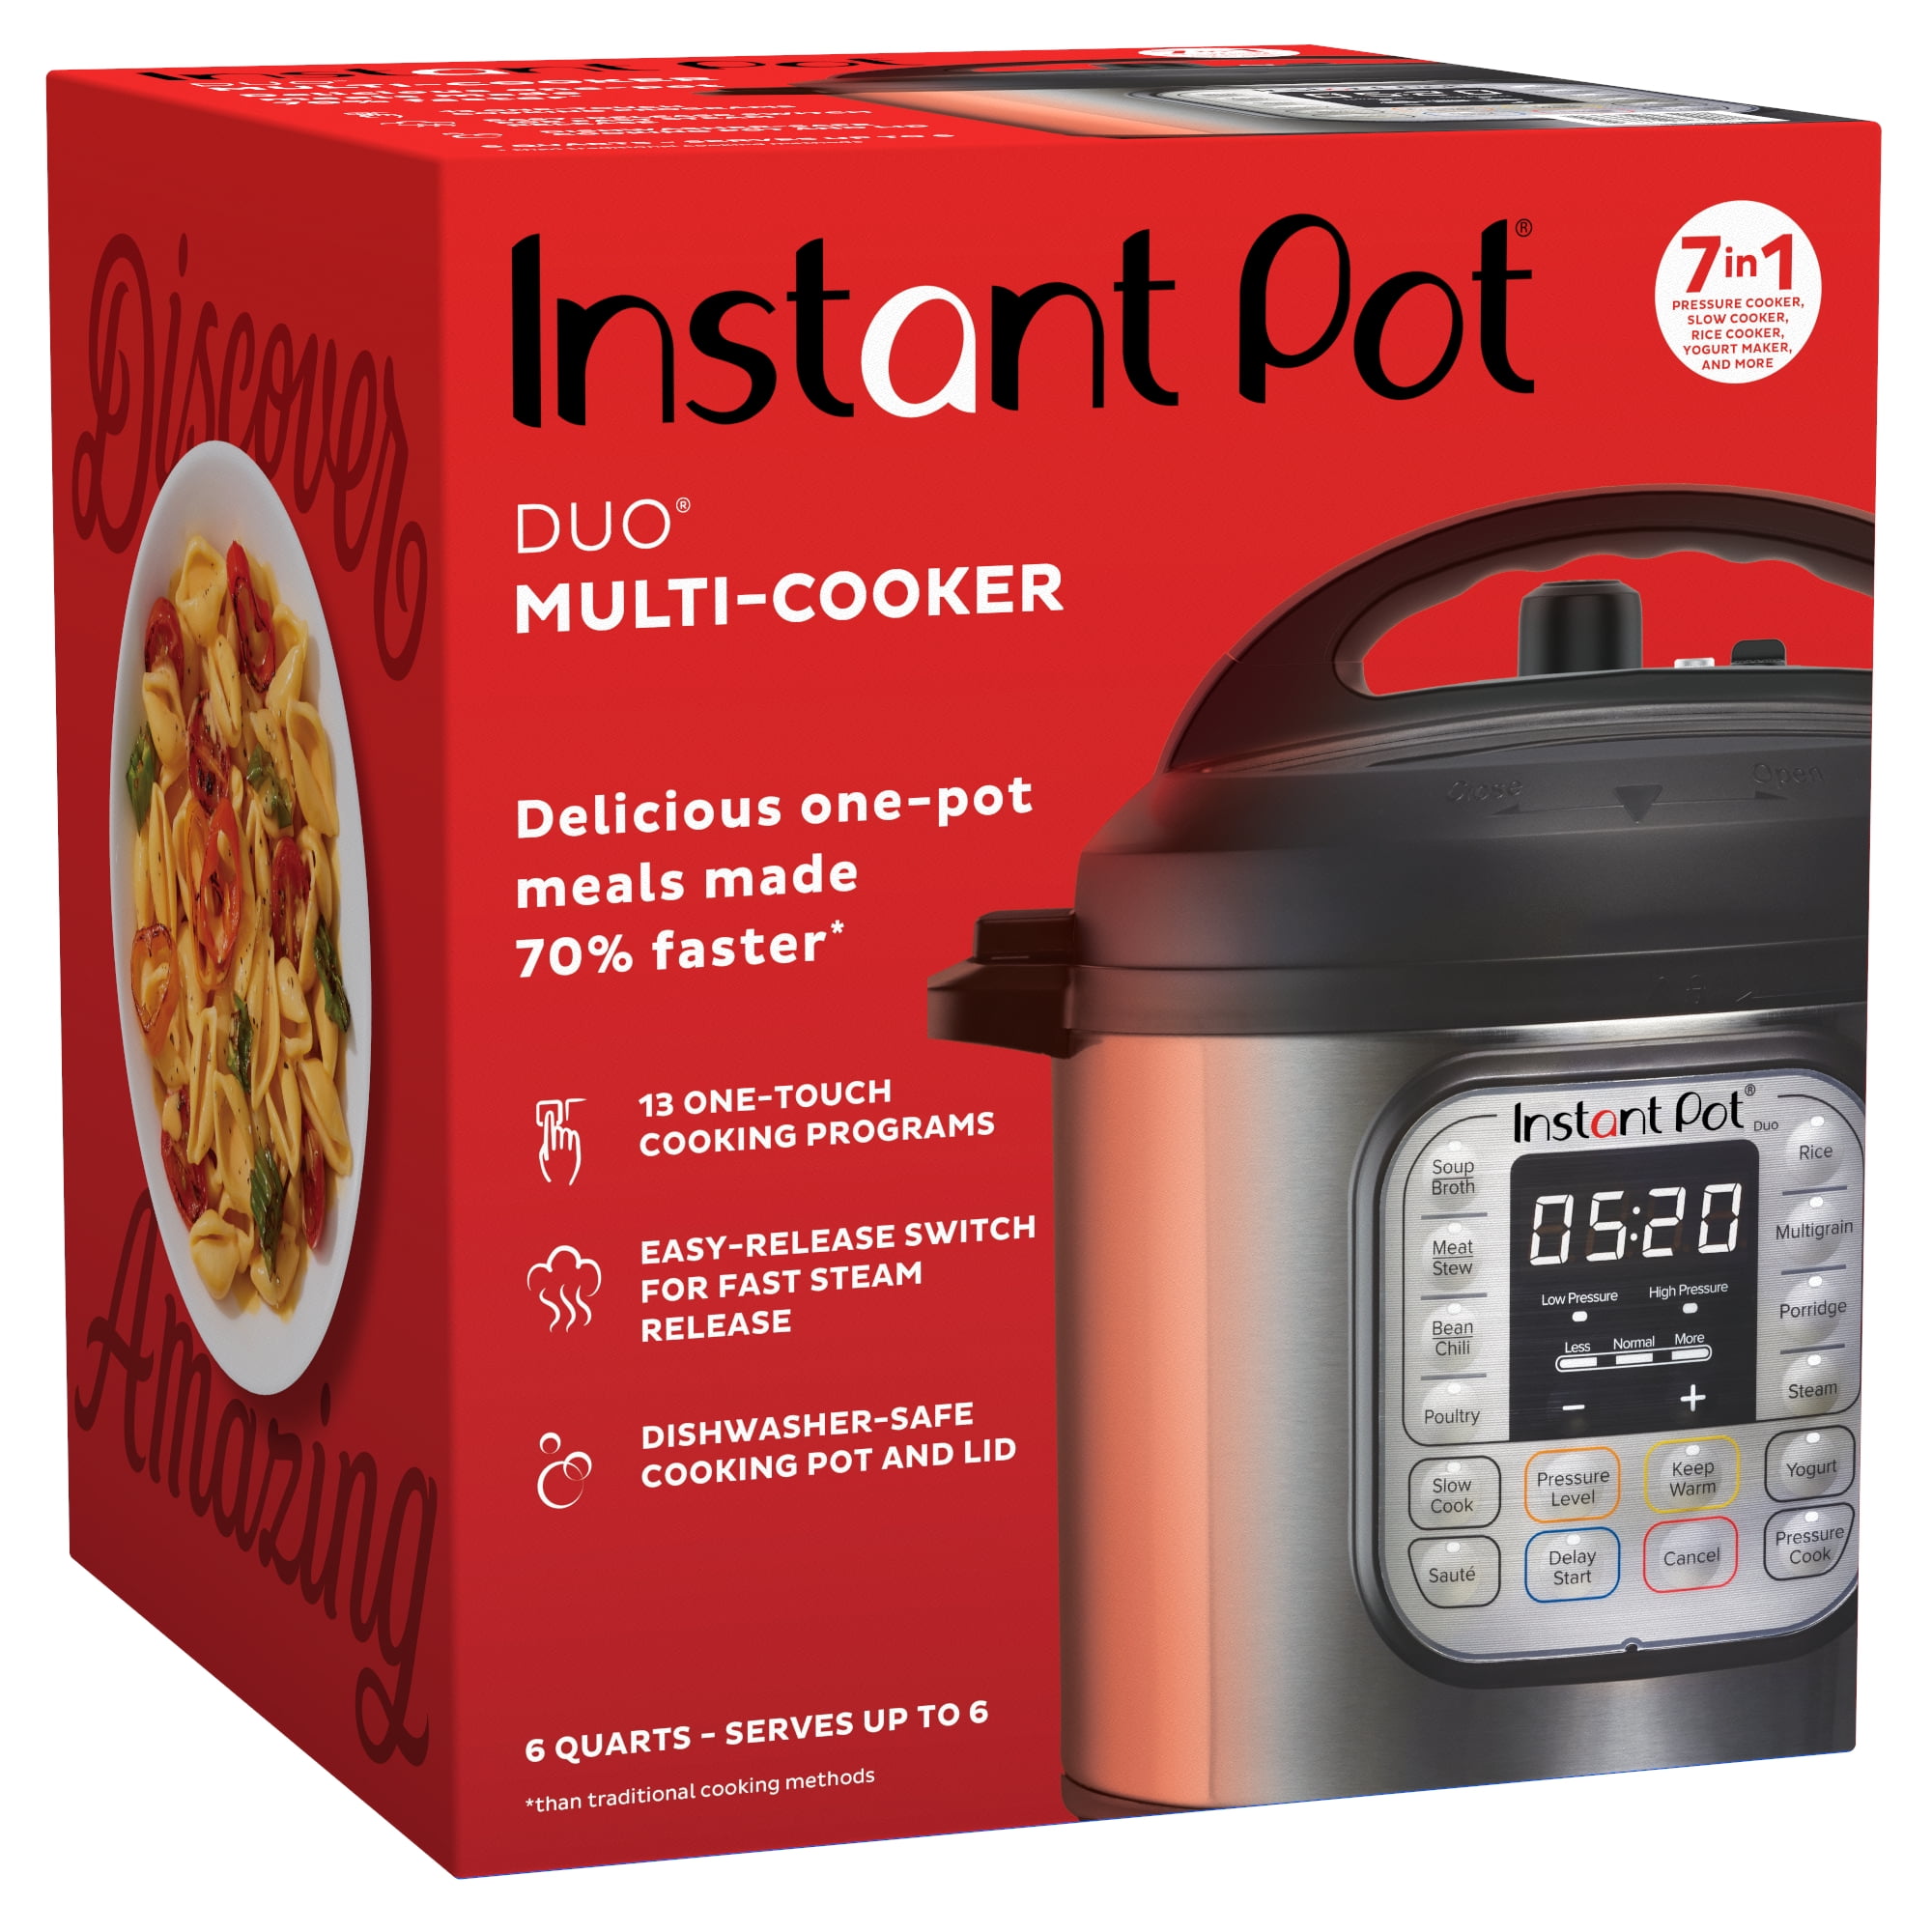 Instant Pot RIO, Formerly Known as Duo, 7-in-1 Electric Multi-Cooker,  Pressure Cooker, Slow Cooker, Rice Cooker, Steamer, Sauté, Yogurt Maker, &  Warmer, Includes App With Over 800 Recipes, 6 Quart